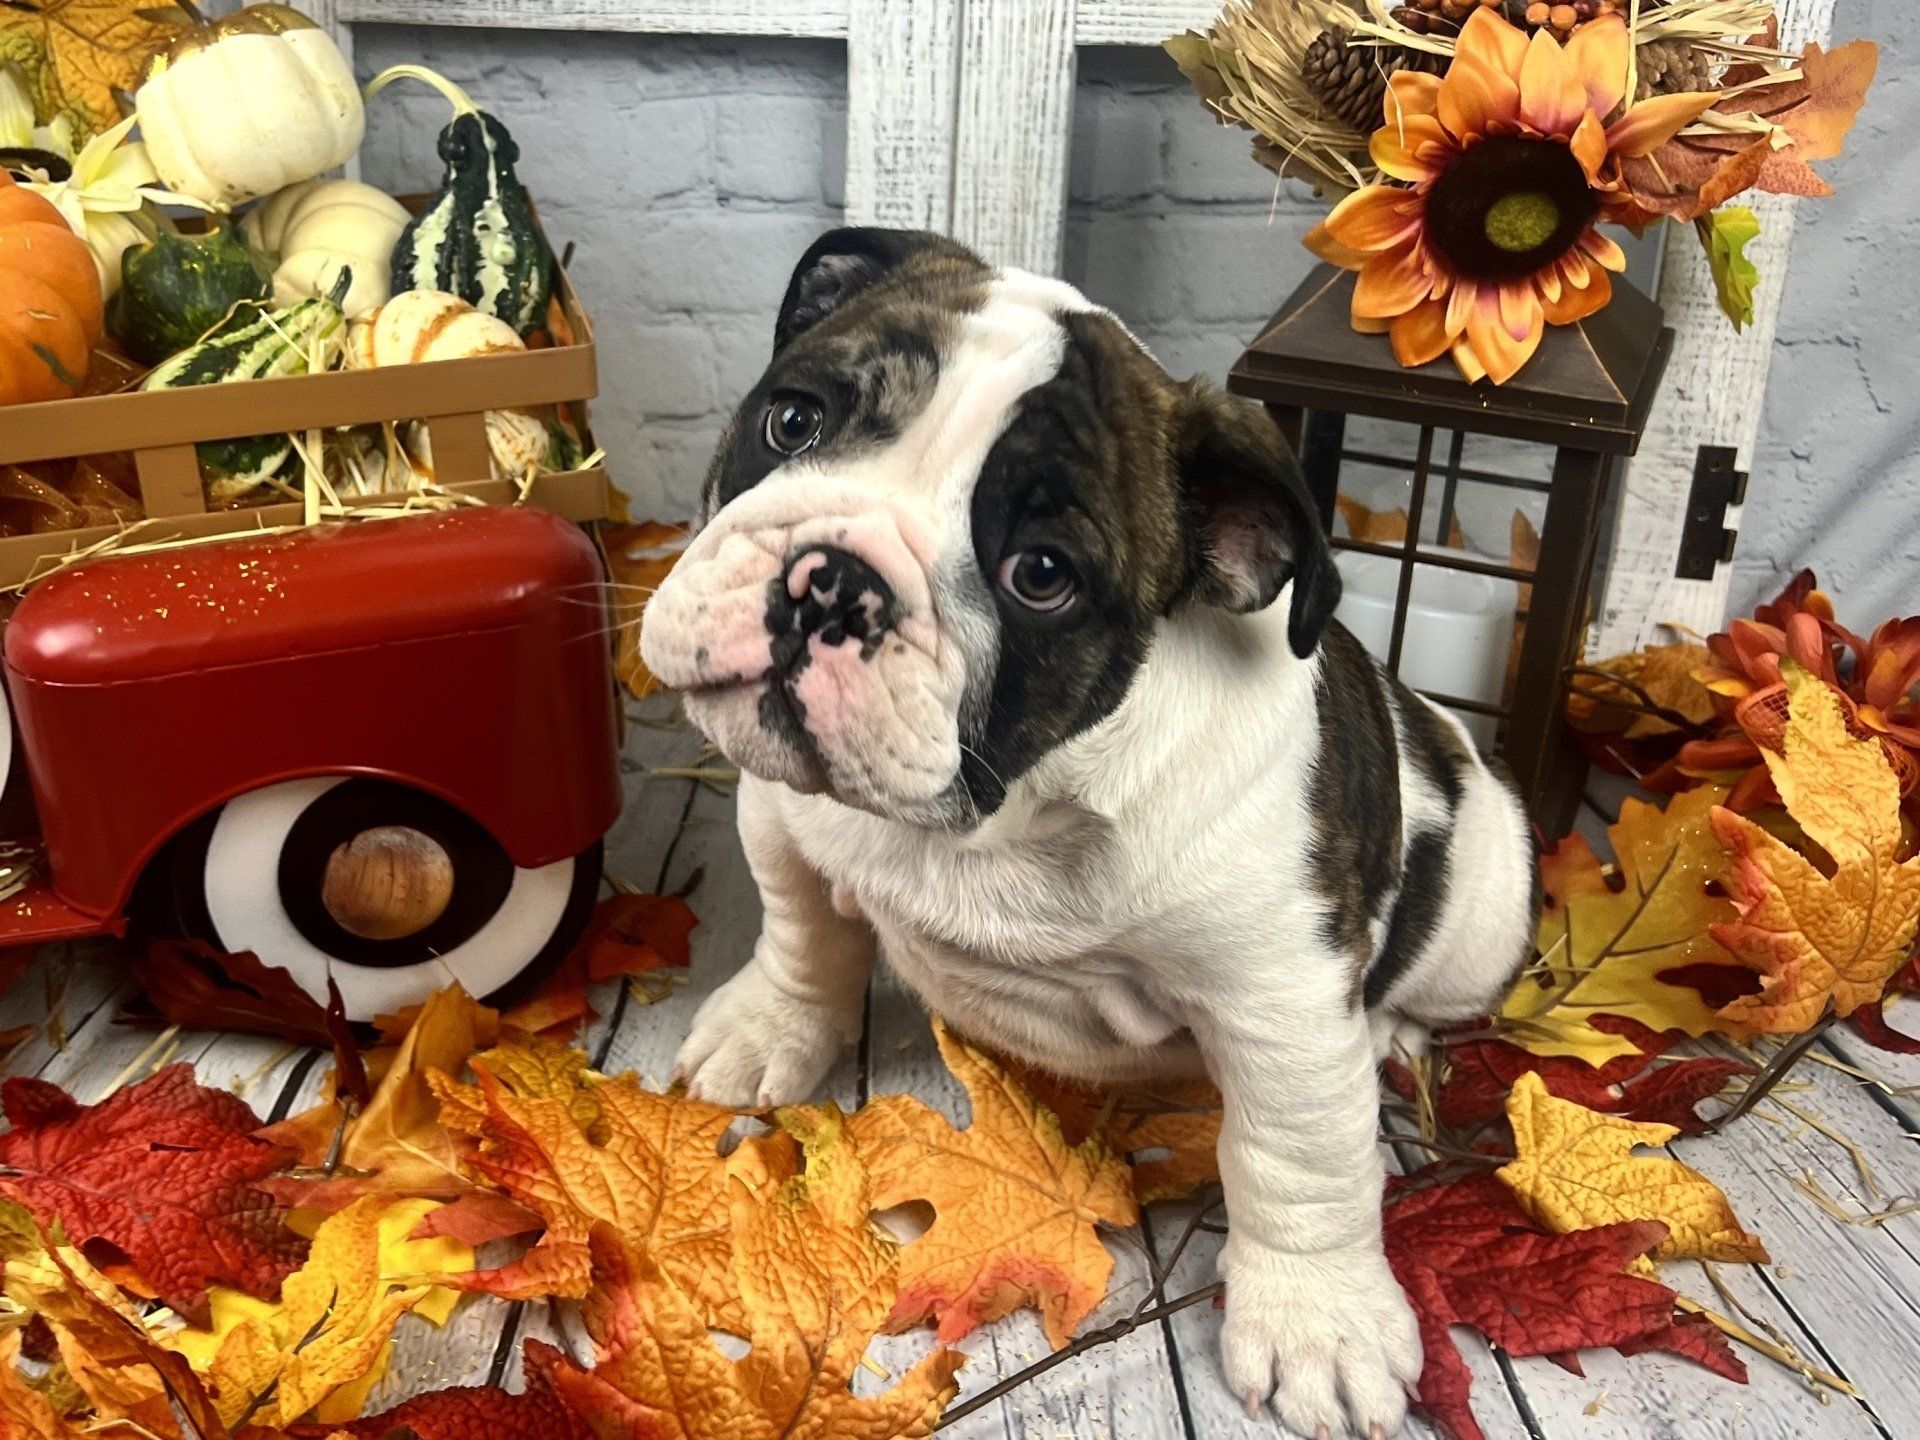 exotic luxury bulldog puppies for sale